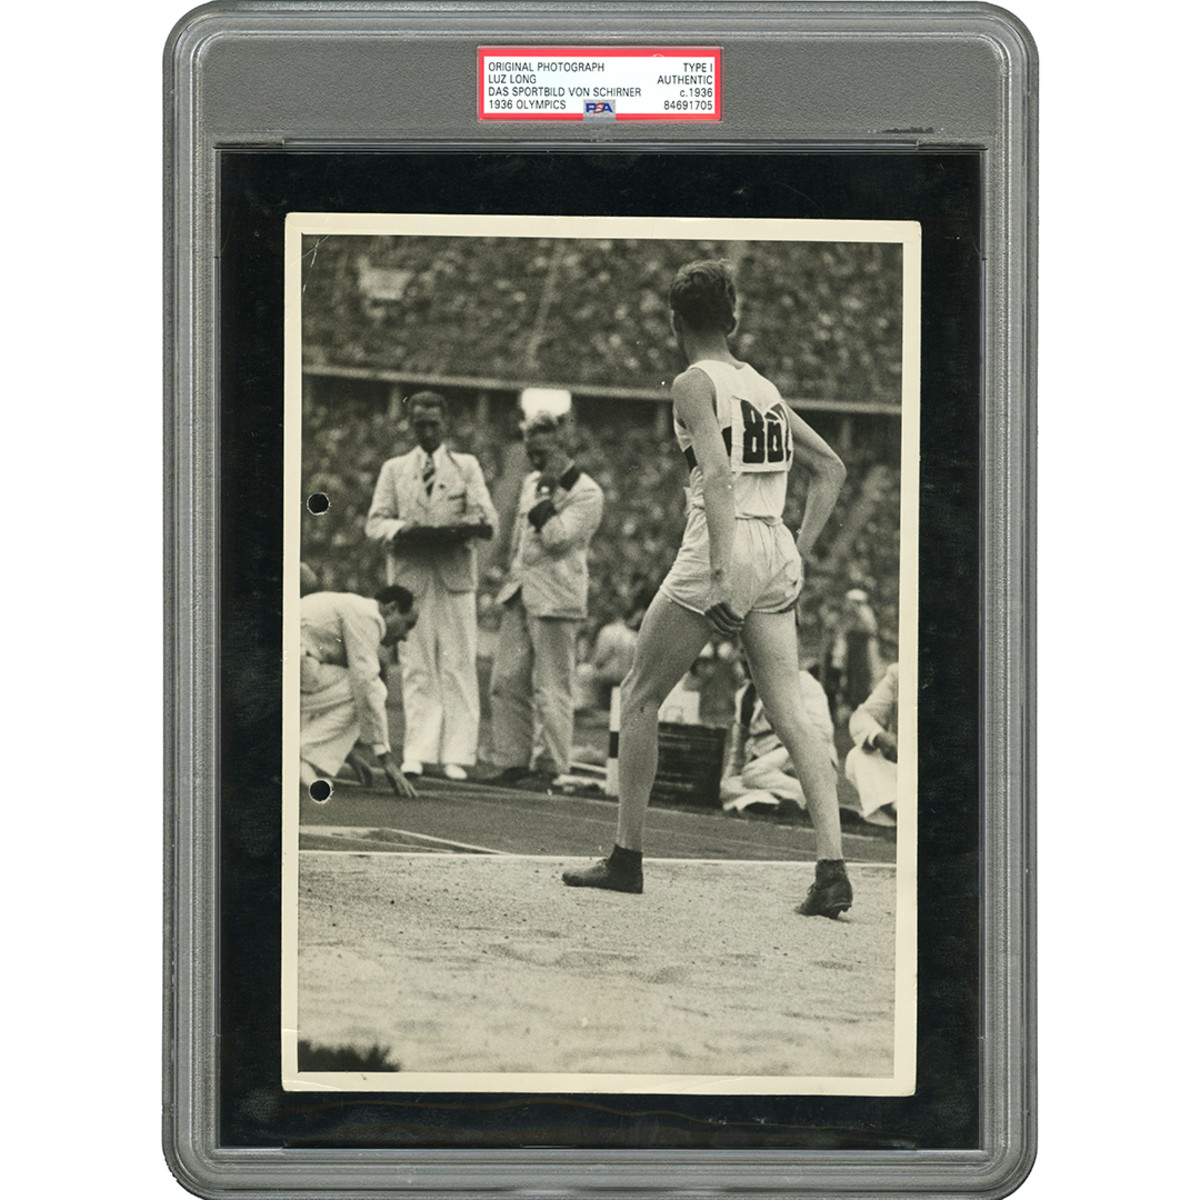 Original Type I photo of Carl "Luz" Long during the 1936 Olympics in Berlin.